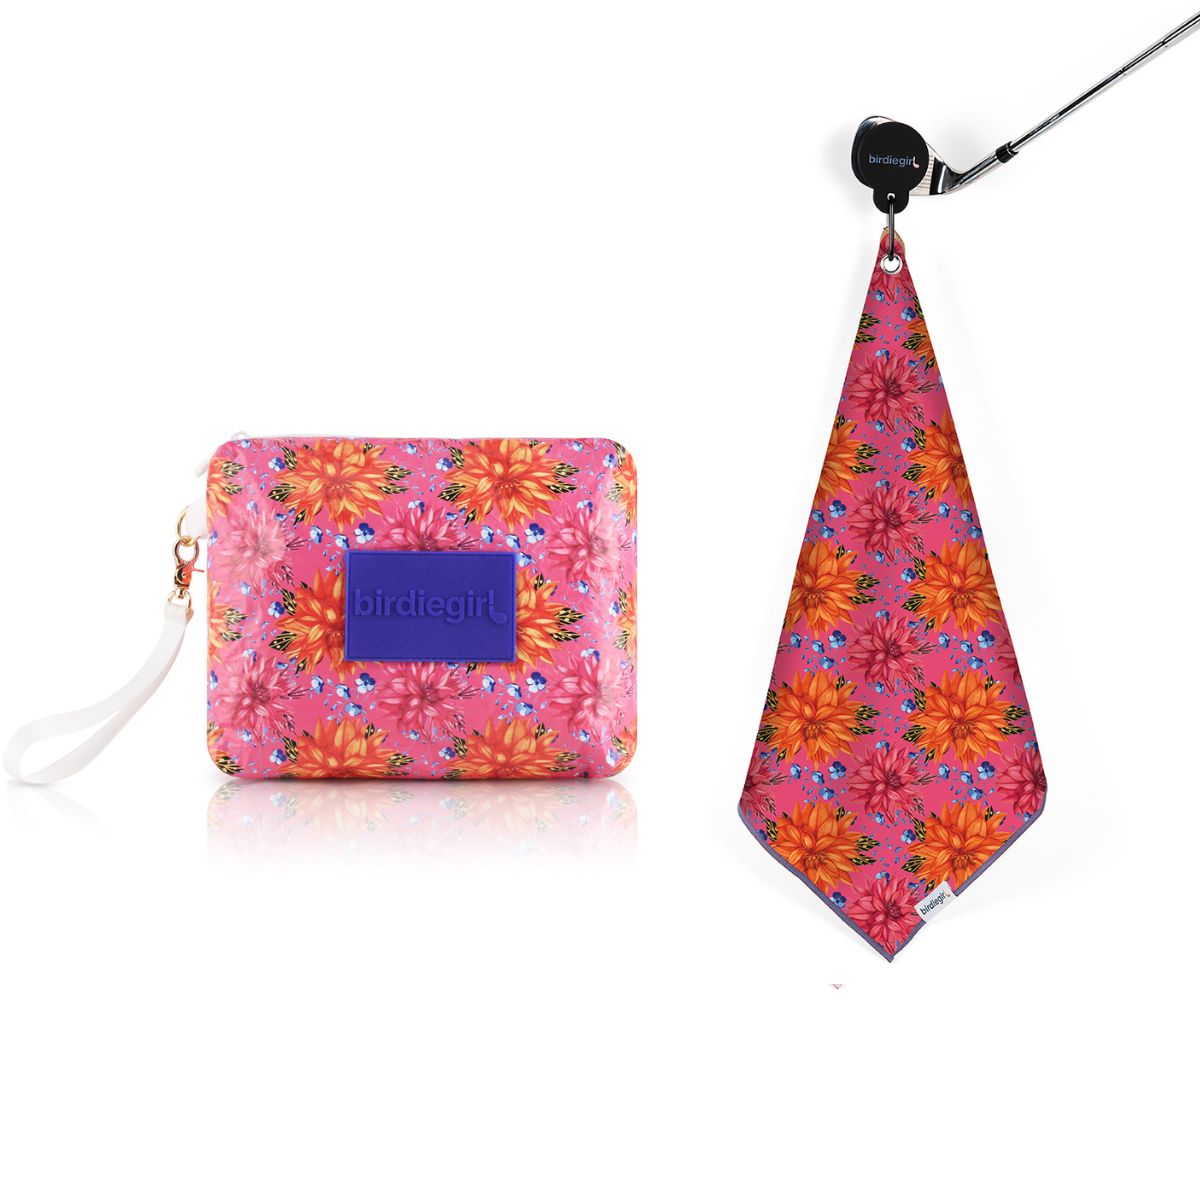 Set of 2: Big Floral Magnetic Golf Towel and Golf Accessory Bag